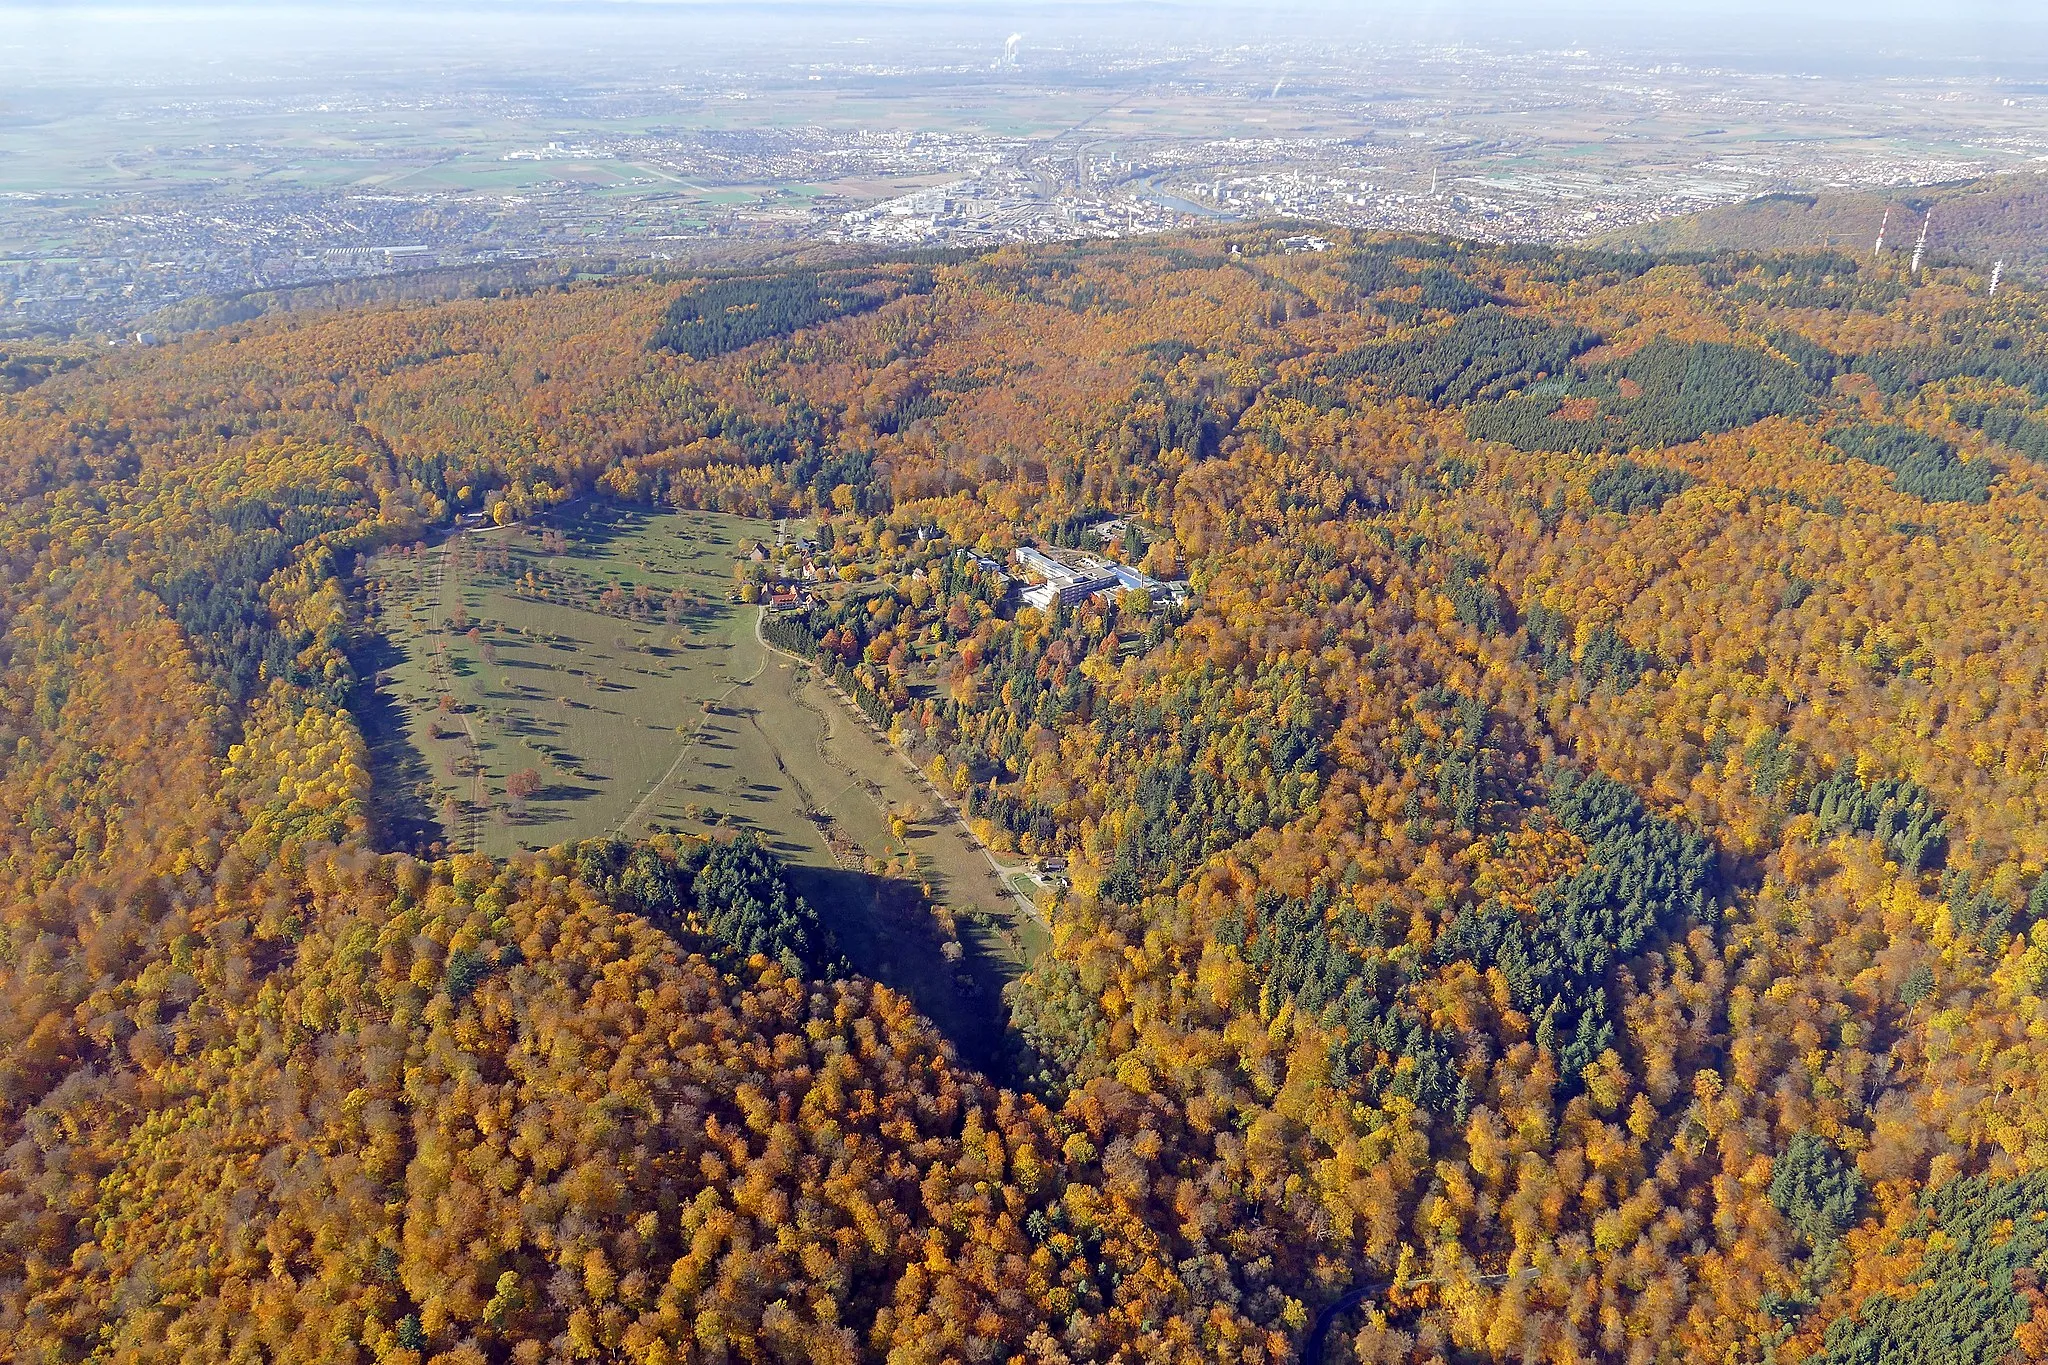 Photo showing: Aerial view of the Kohlhof on the Königstuhl in late autumn with a view towards Heidelberg in the Neckar valley (east-west direction) from a gyrocopter at an altitude of around 3100 feet. On the far right of the picture are the antennas of the Königstuhl summit; the Max Planck Institute for Astronomy can also be seen between Kohlhof and the antennas.